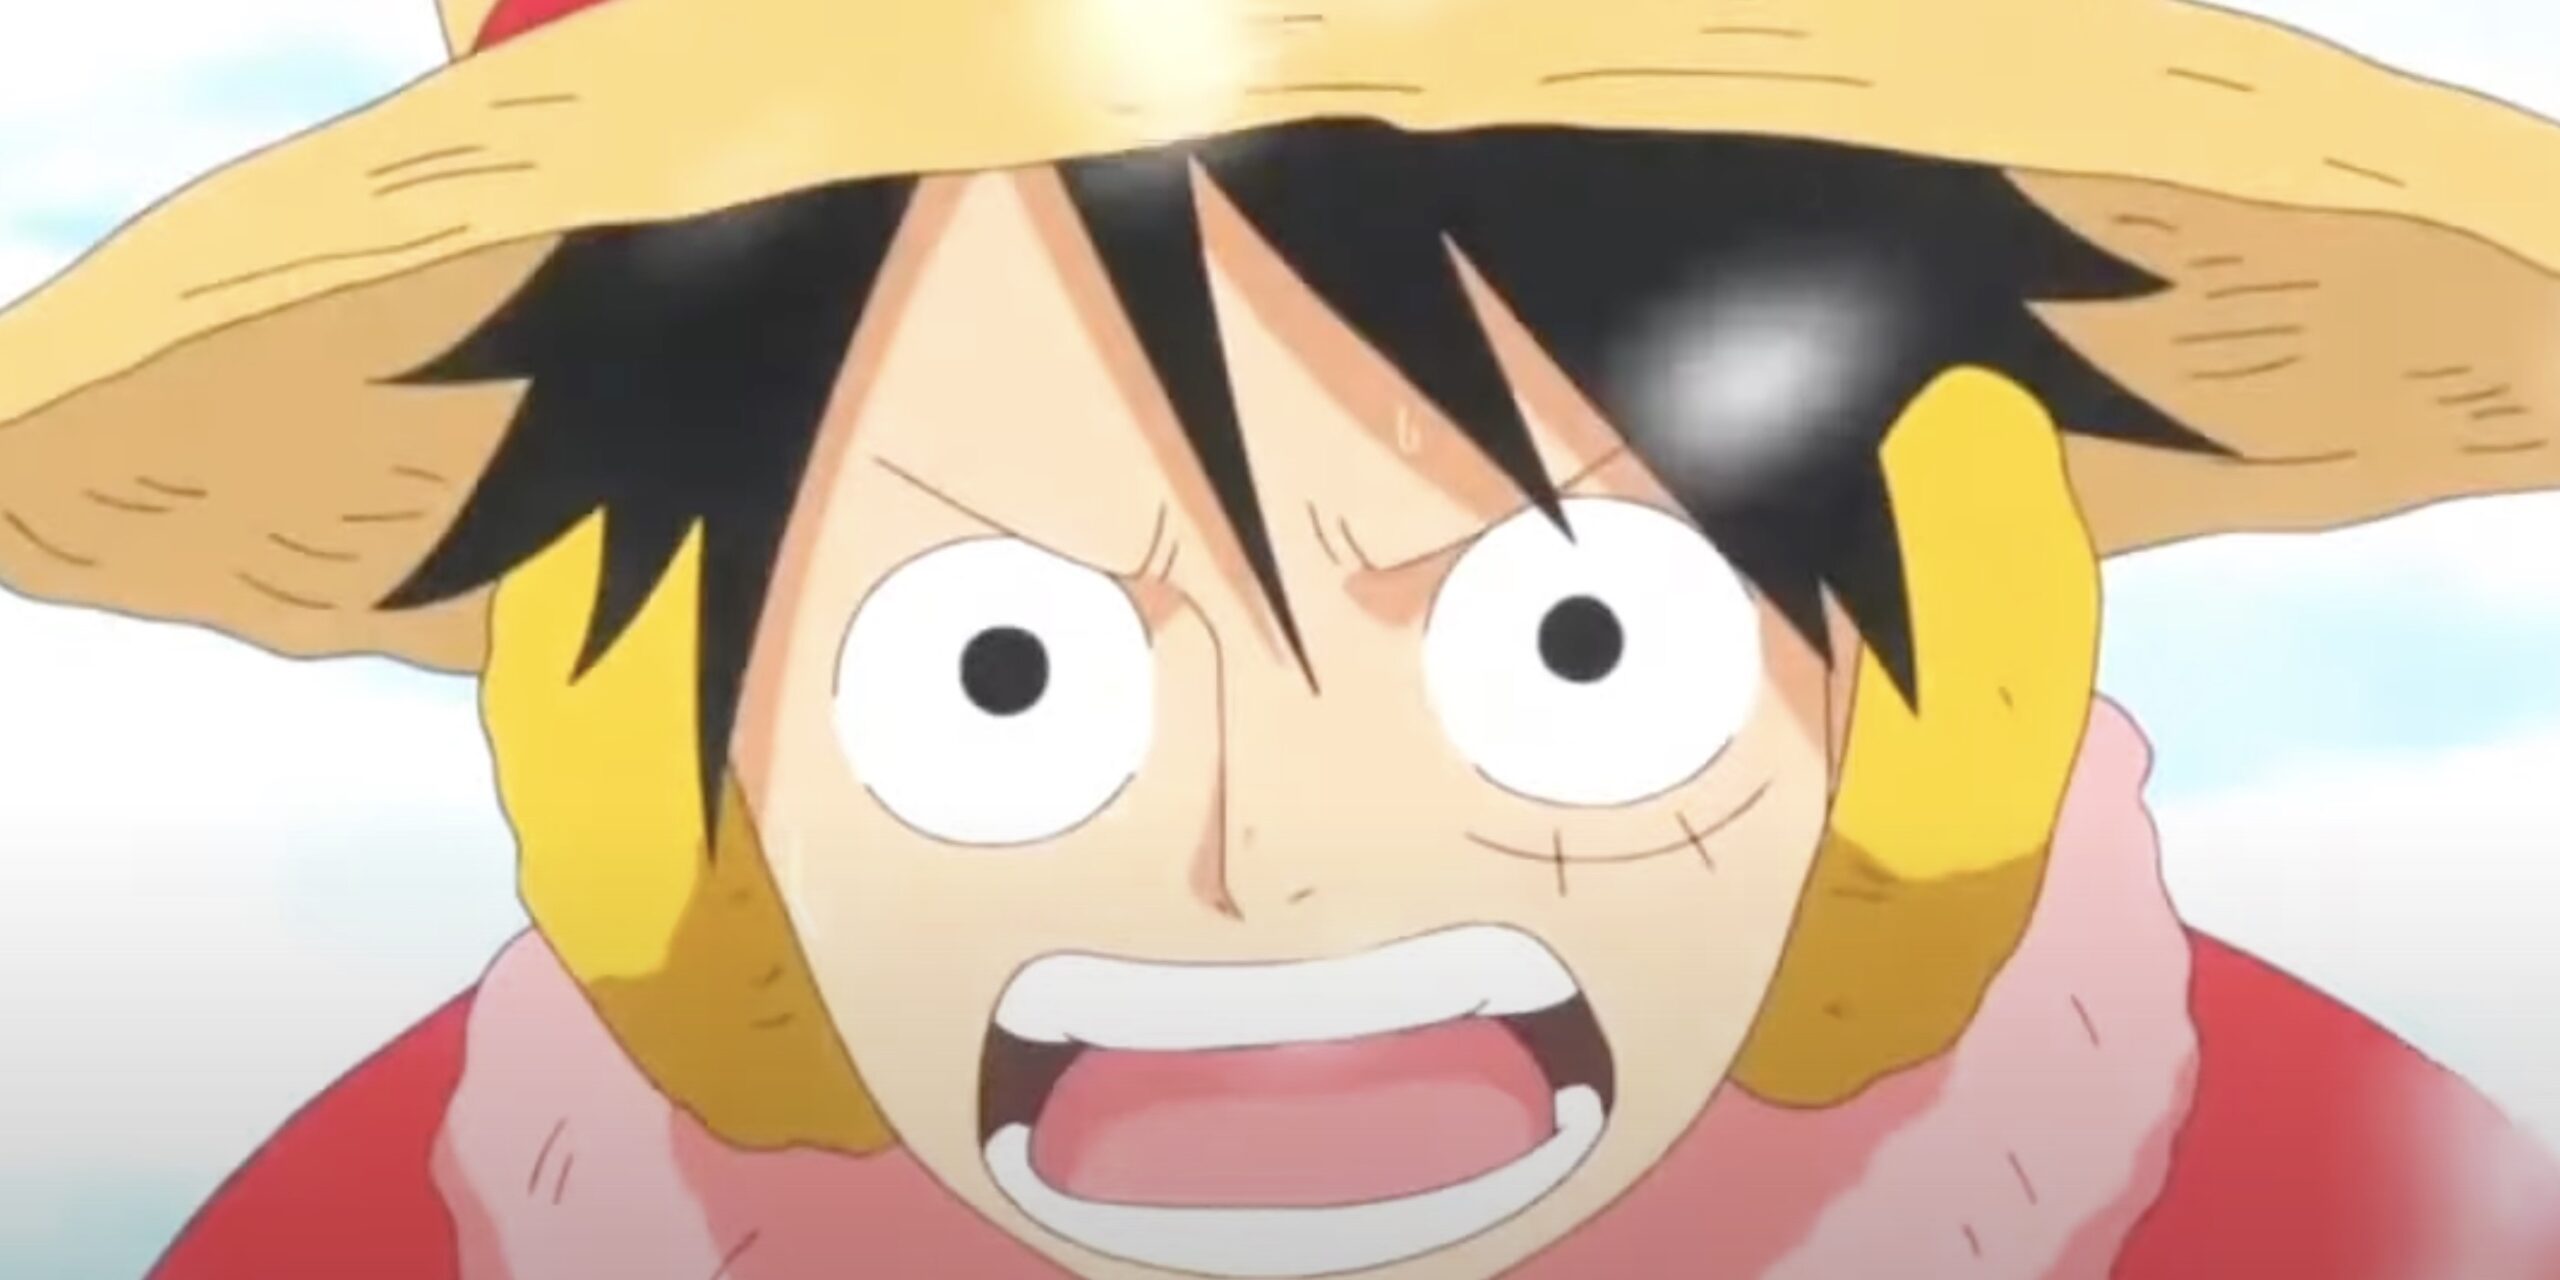 One Piece Manga Gets Emotional With Its Most Heartbreaking Cliffhanger Yet